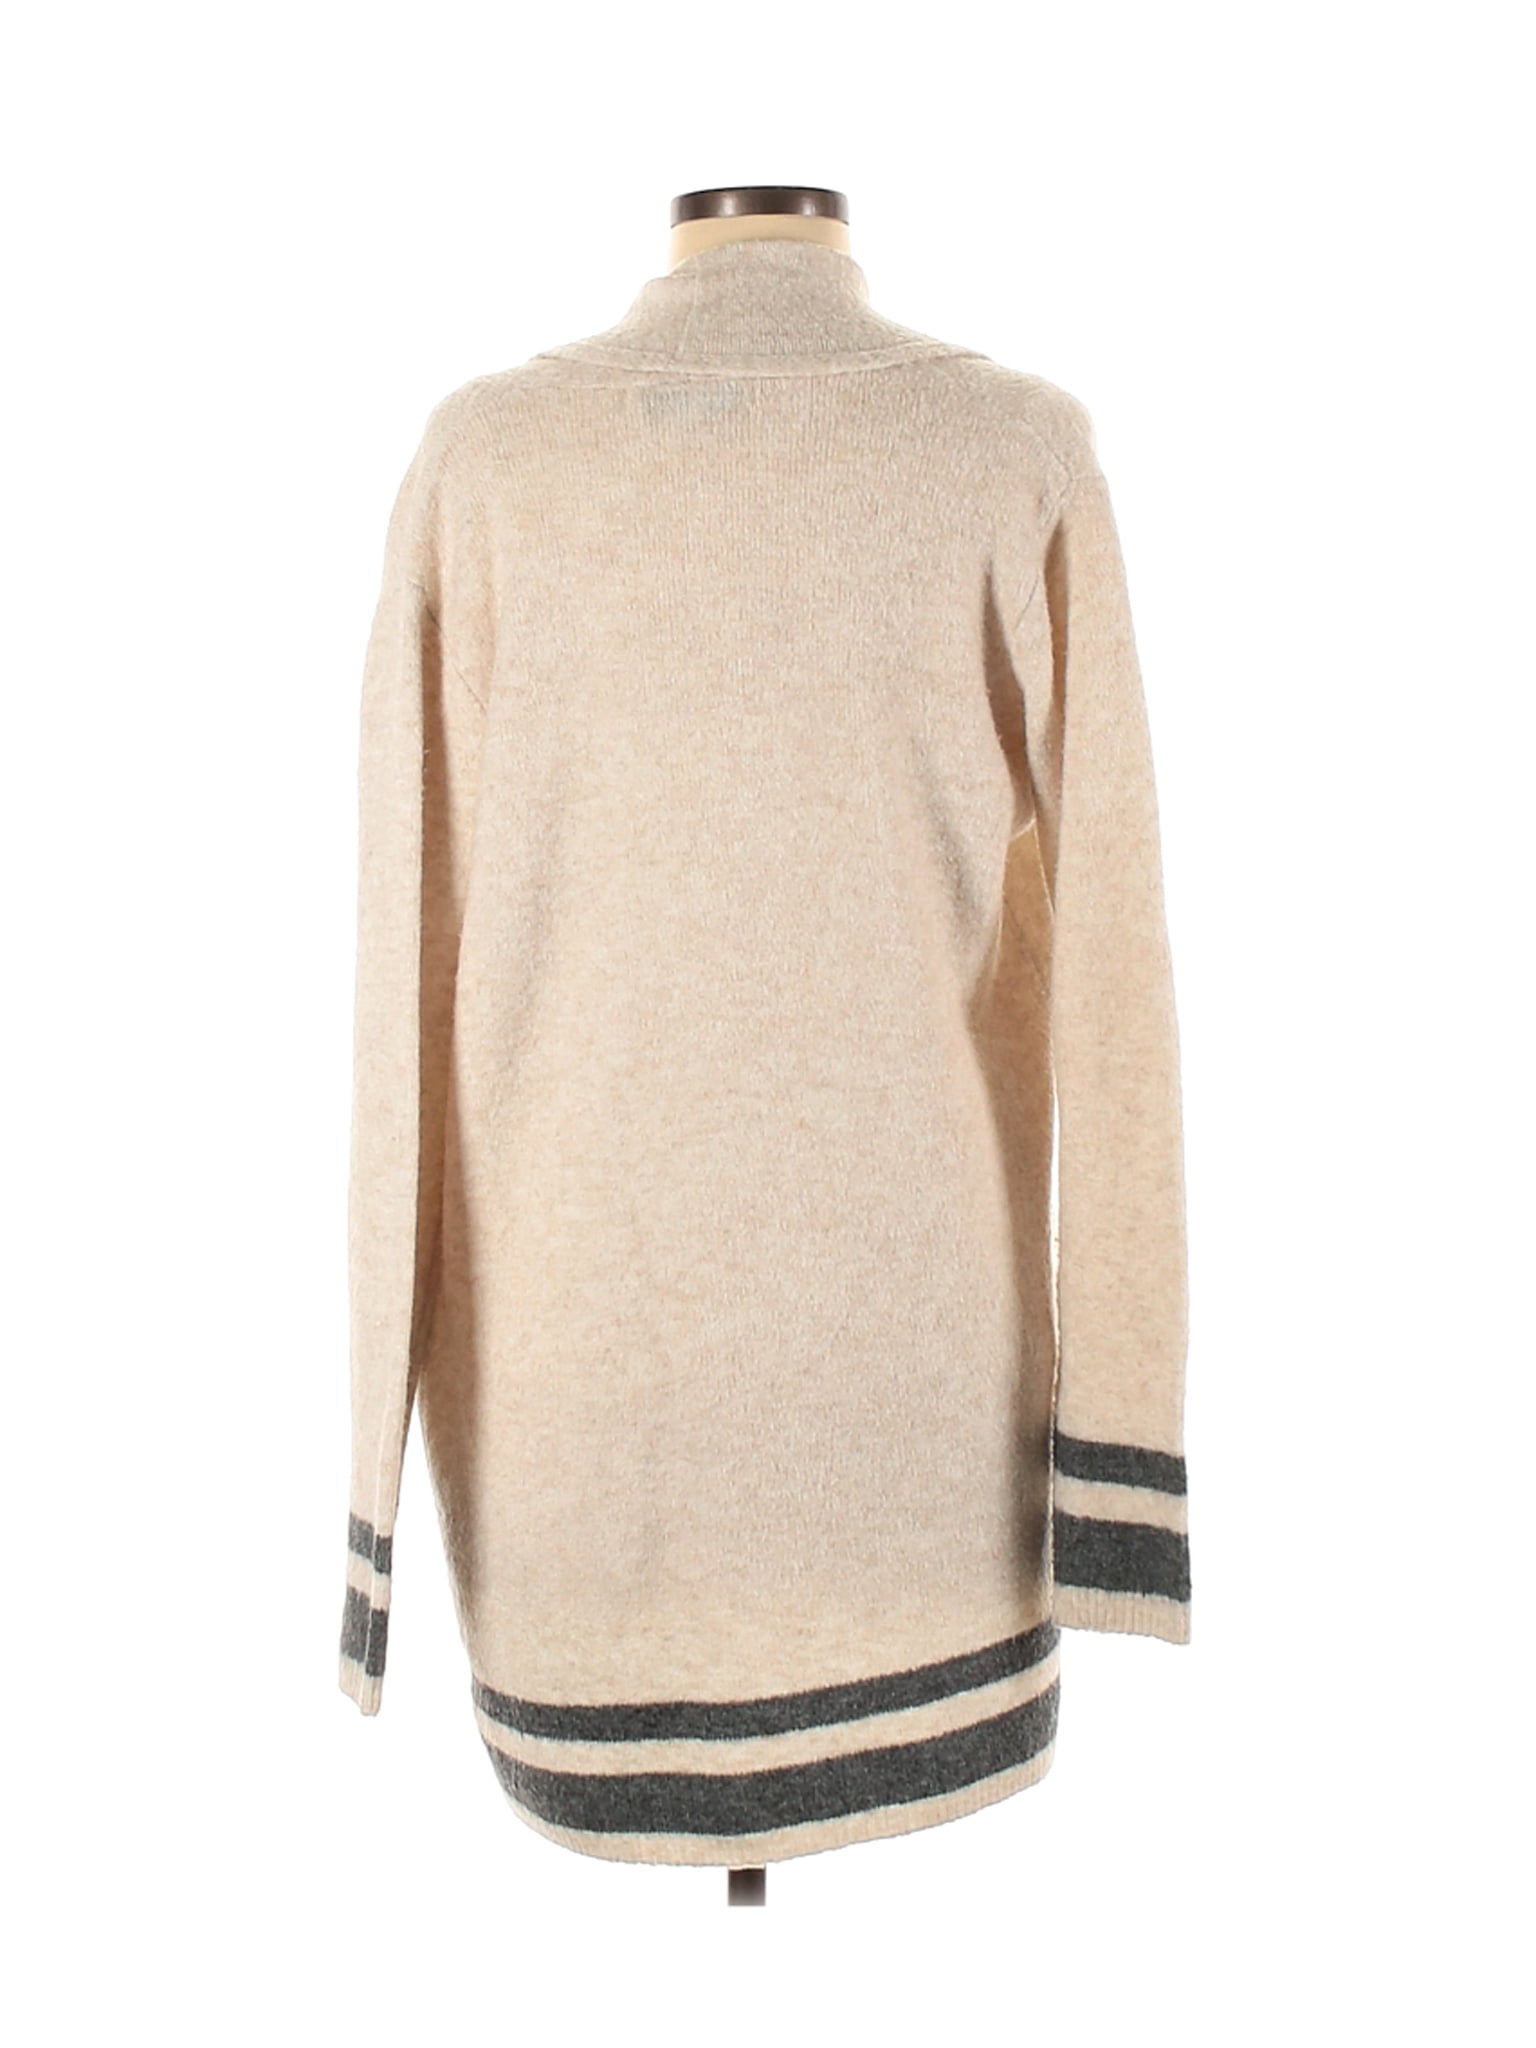 cupcakes and cashmere Womens Hank Striped Shawl Collar Cardigan 